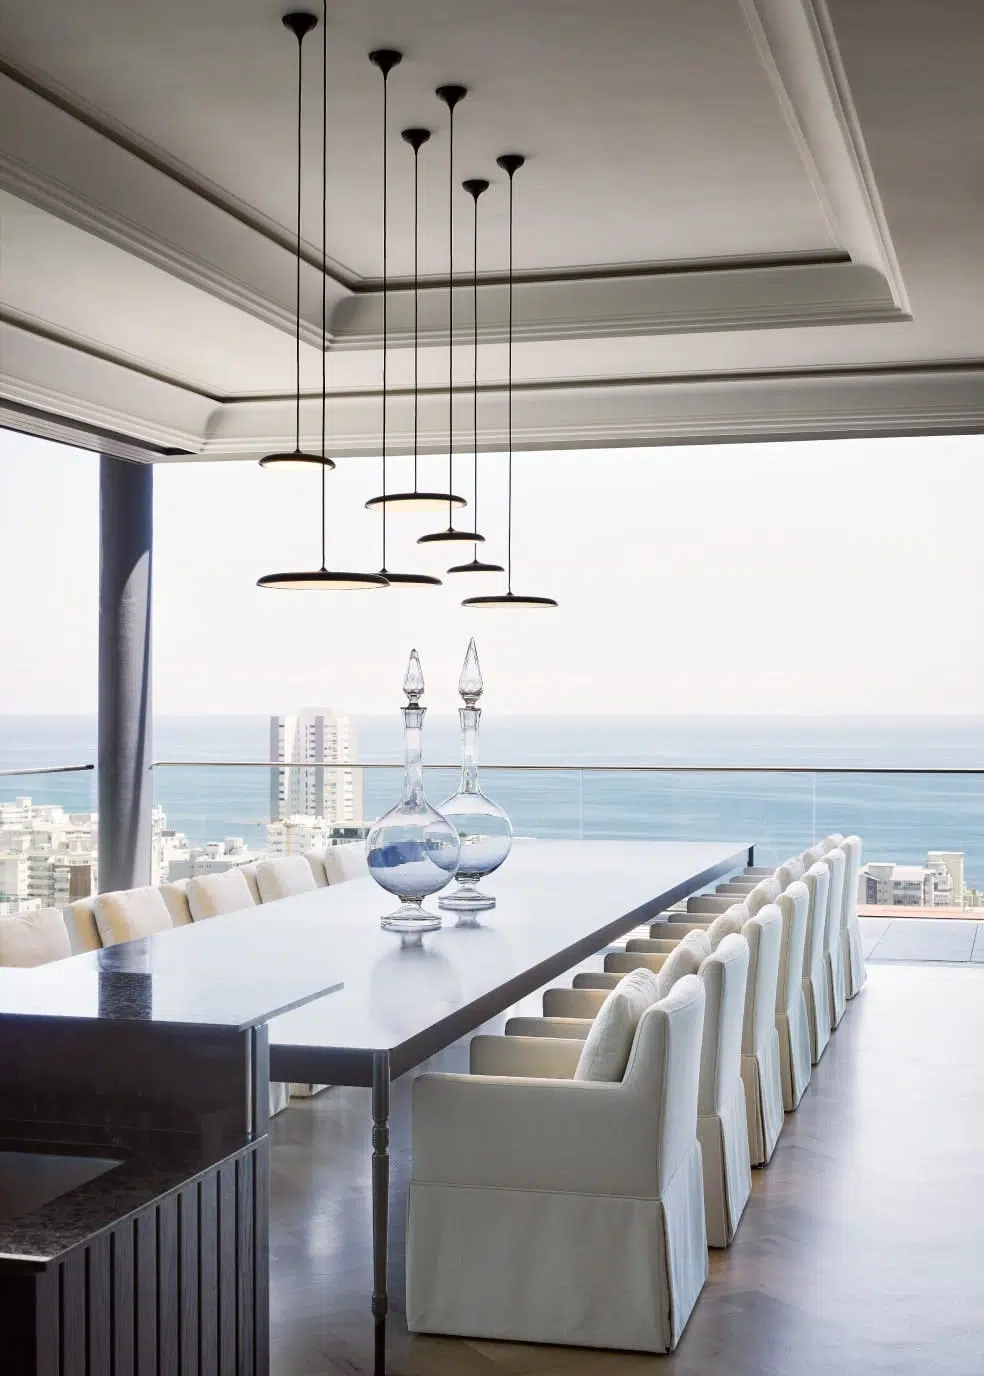 Modern dining room with a long table, plush chairs, pendant lights, and an ocean view.